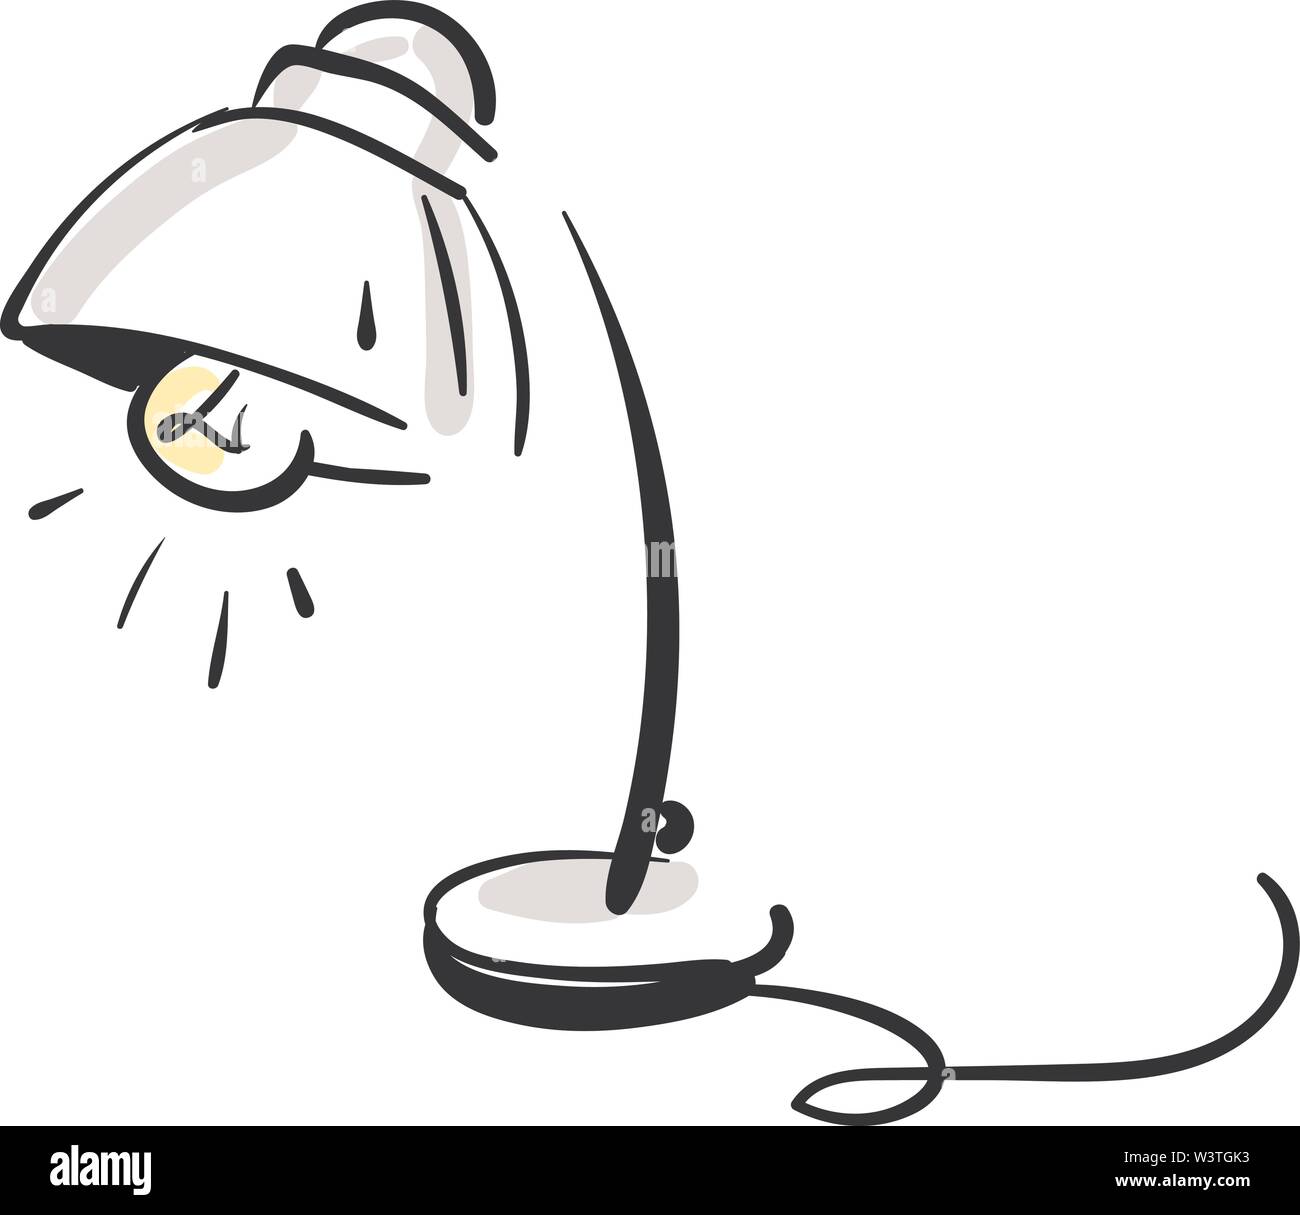 a sketch of a table lamp glowing vector color drawing or illustration W3TGK3